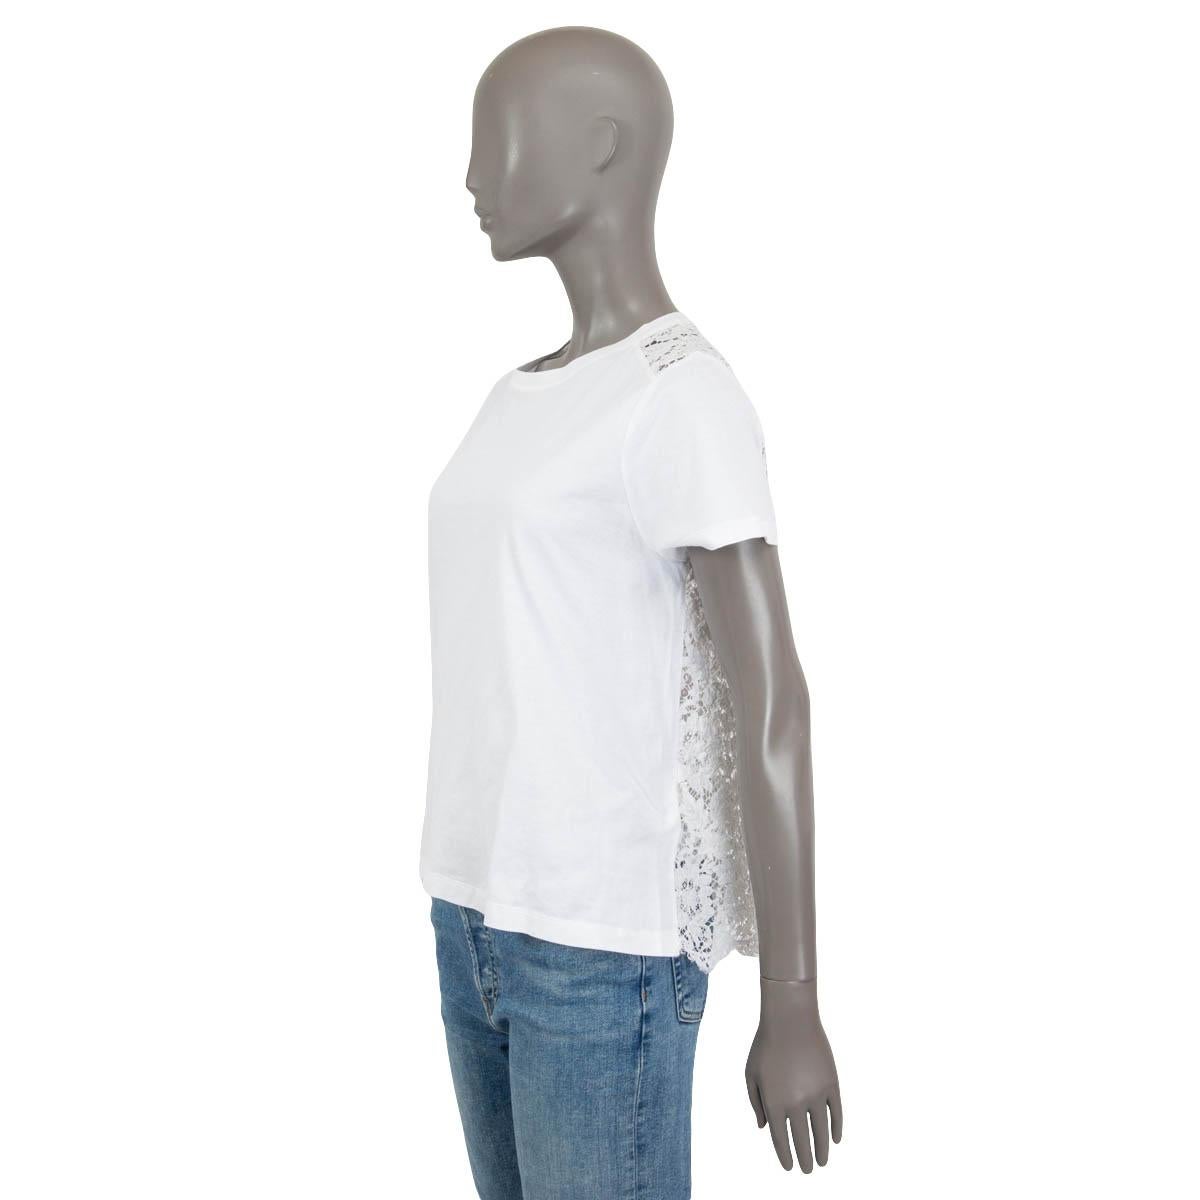 100% authentic Valentino top in white cotton (100%). Embellished with white lace (cotton 77% and viscose 17%) on the back and the sides. Has short sleeves and is unlined. Has been worn and is in excellent condition.

Measurements
Tag